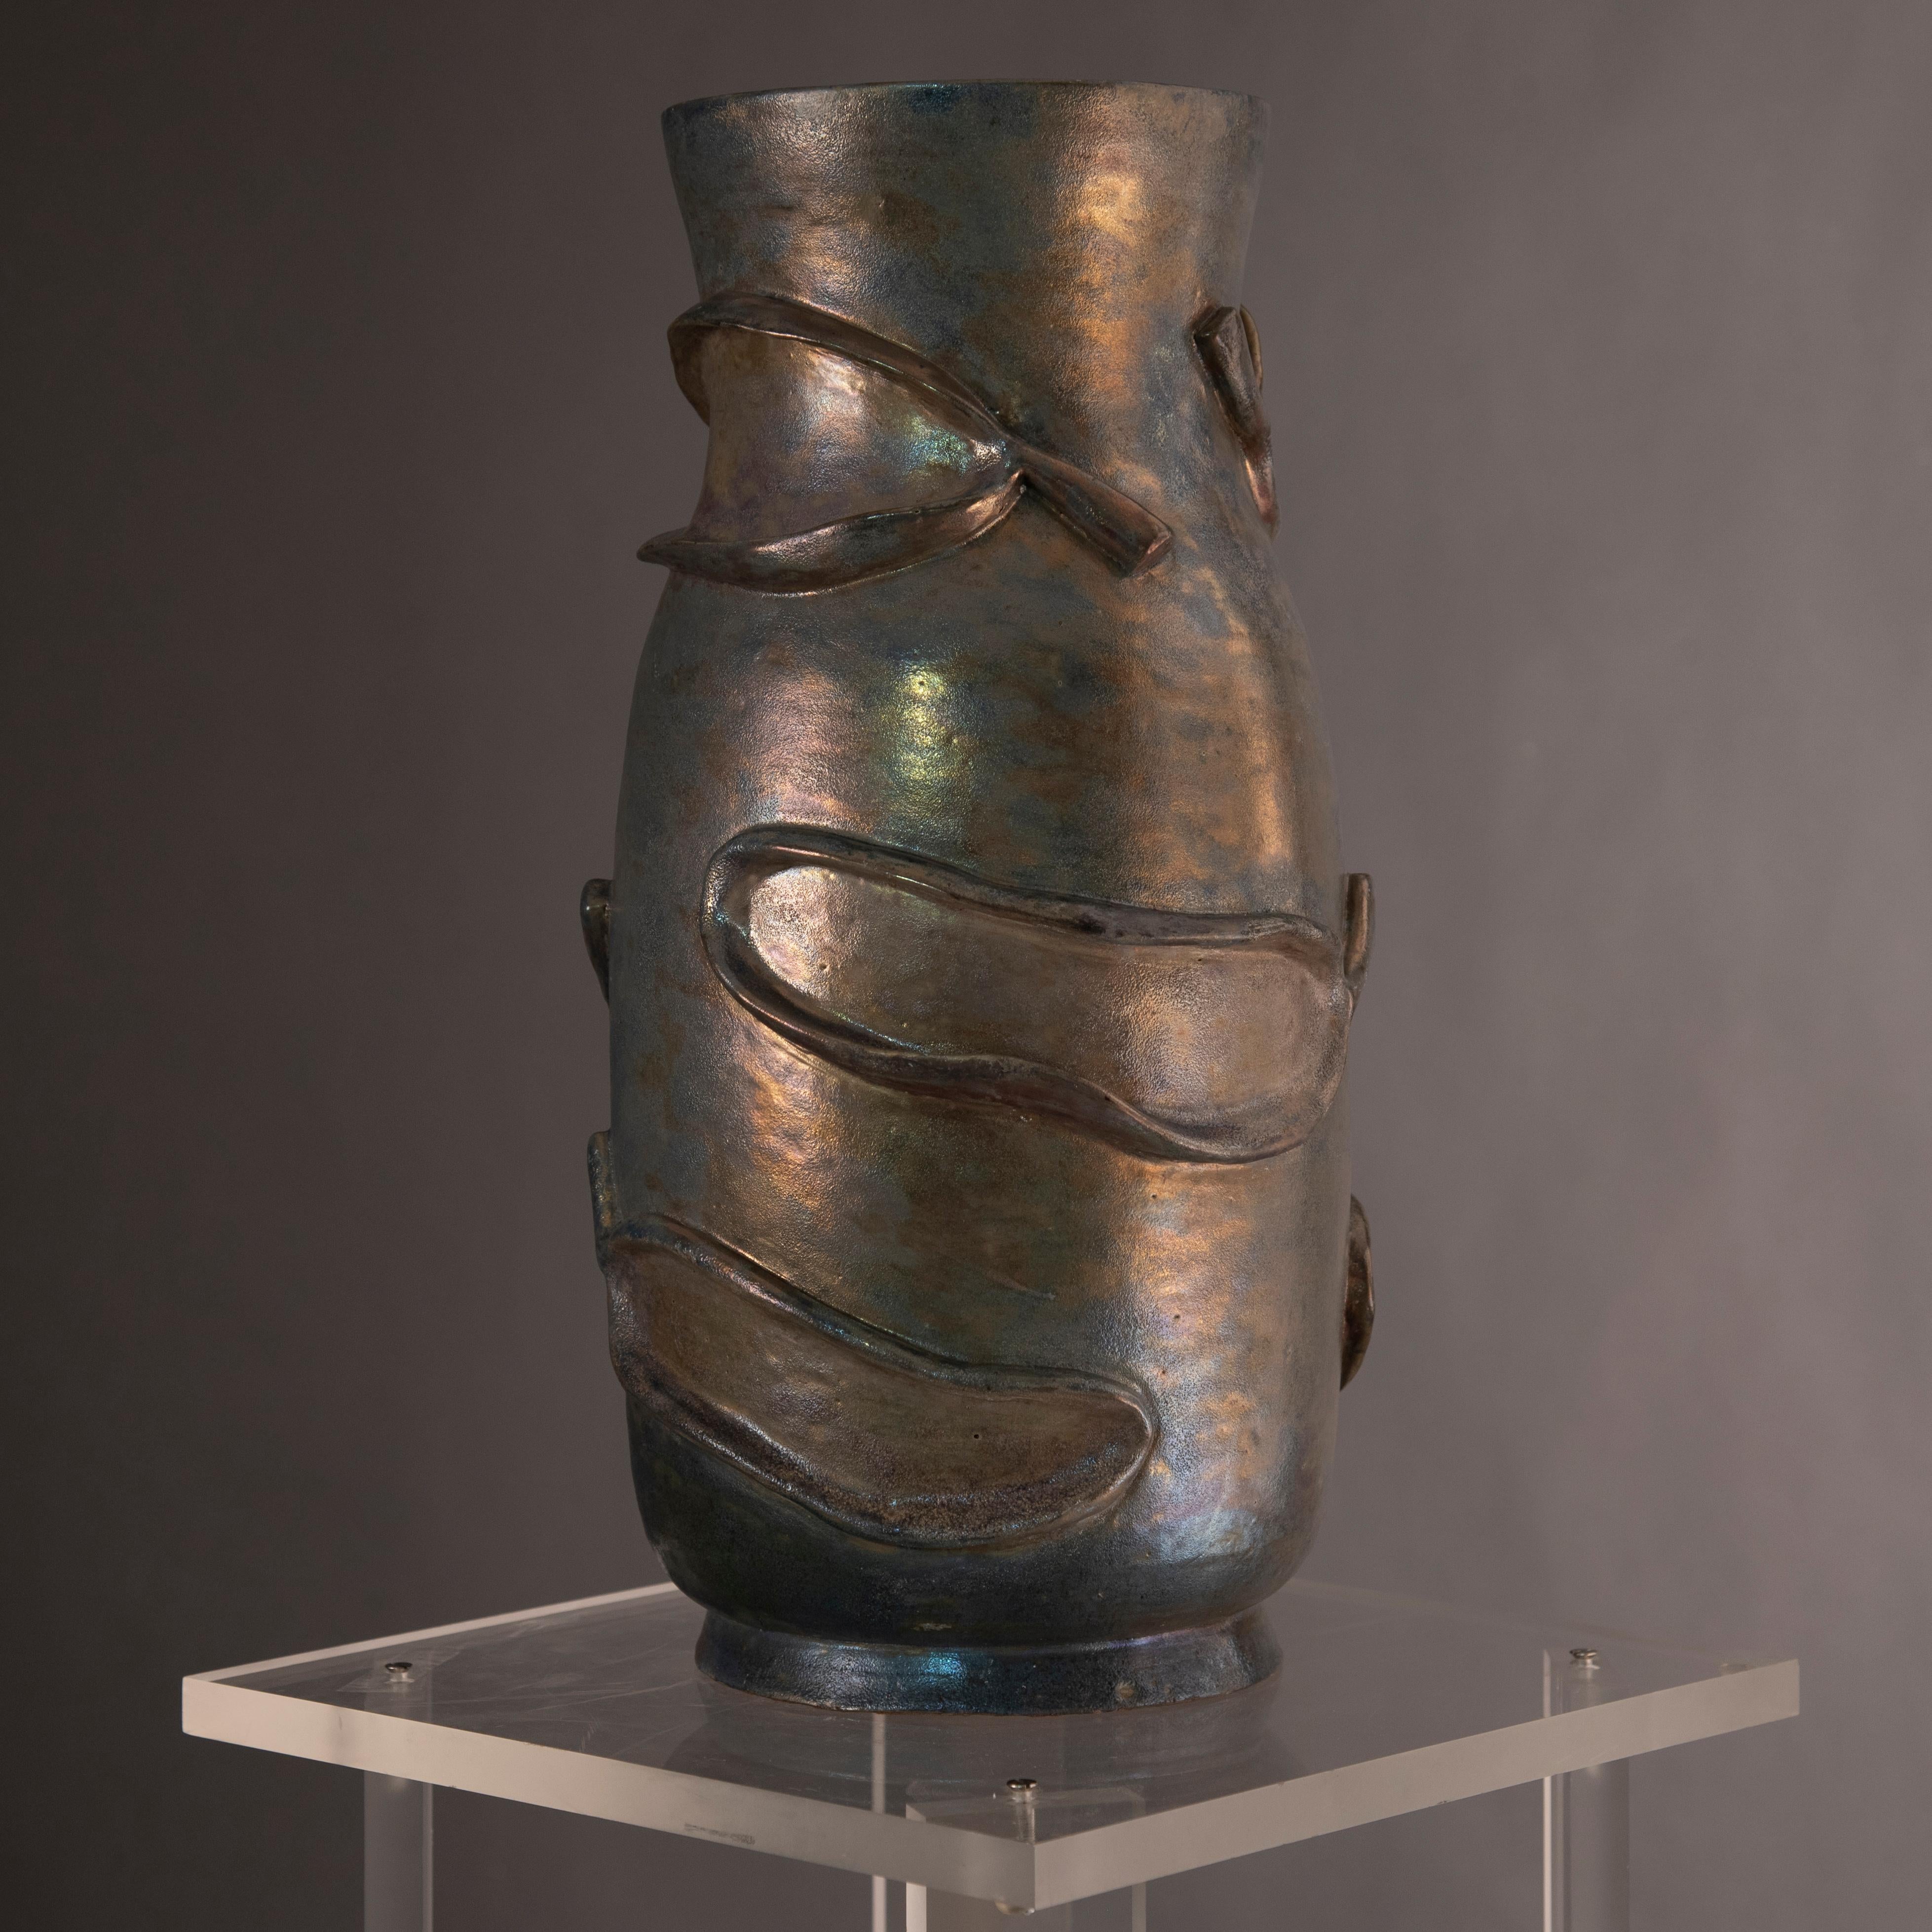 Pietro Melandri terracotta vase.
Faenza, 1938.
Tall vase made of grey-green majolica terracotta with golden metallic highlights. Signature at the base: Melandri.
He was one of the best Italian ceramist but also a scenographer and painter. 
He